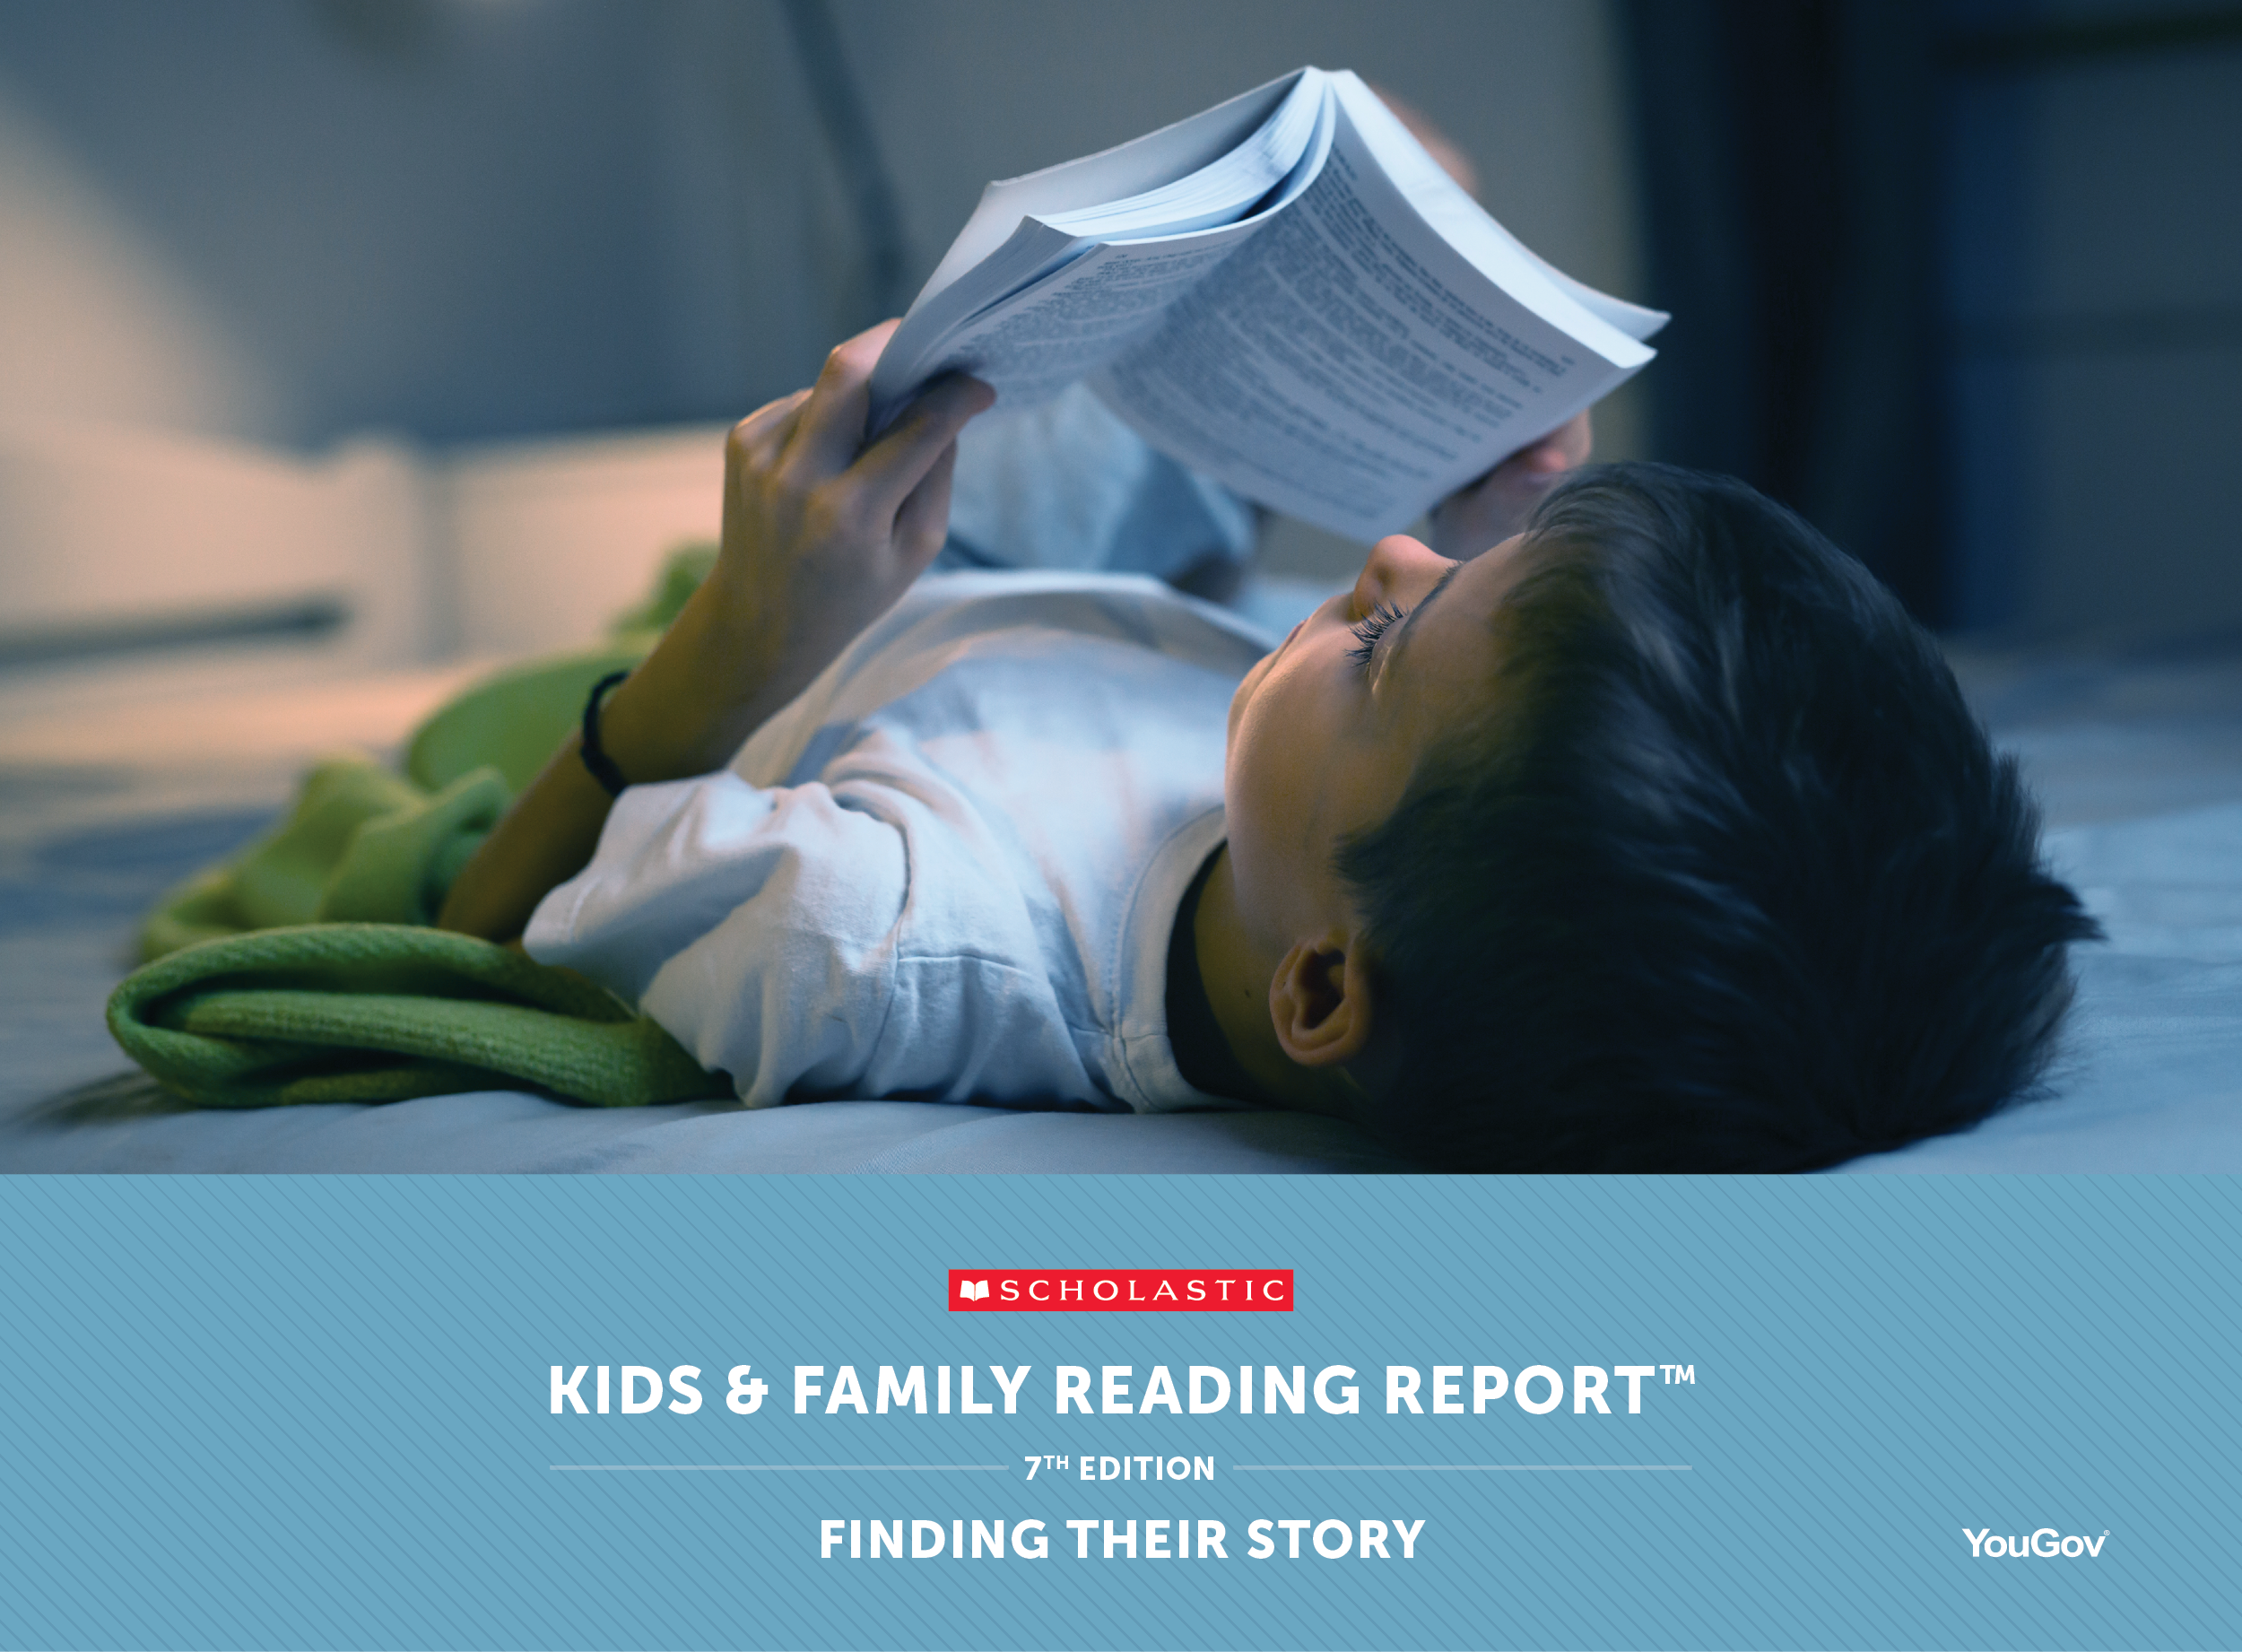 Kids & Family Reading Report 7th Edition